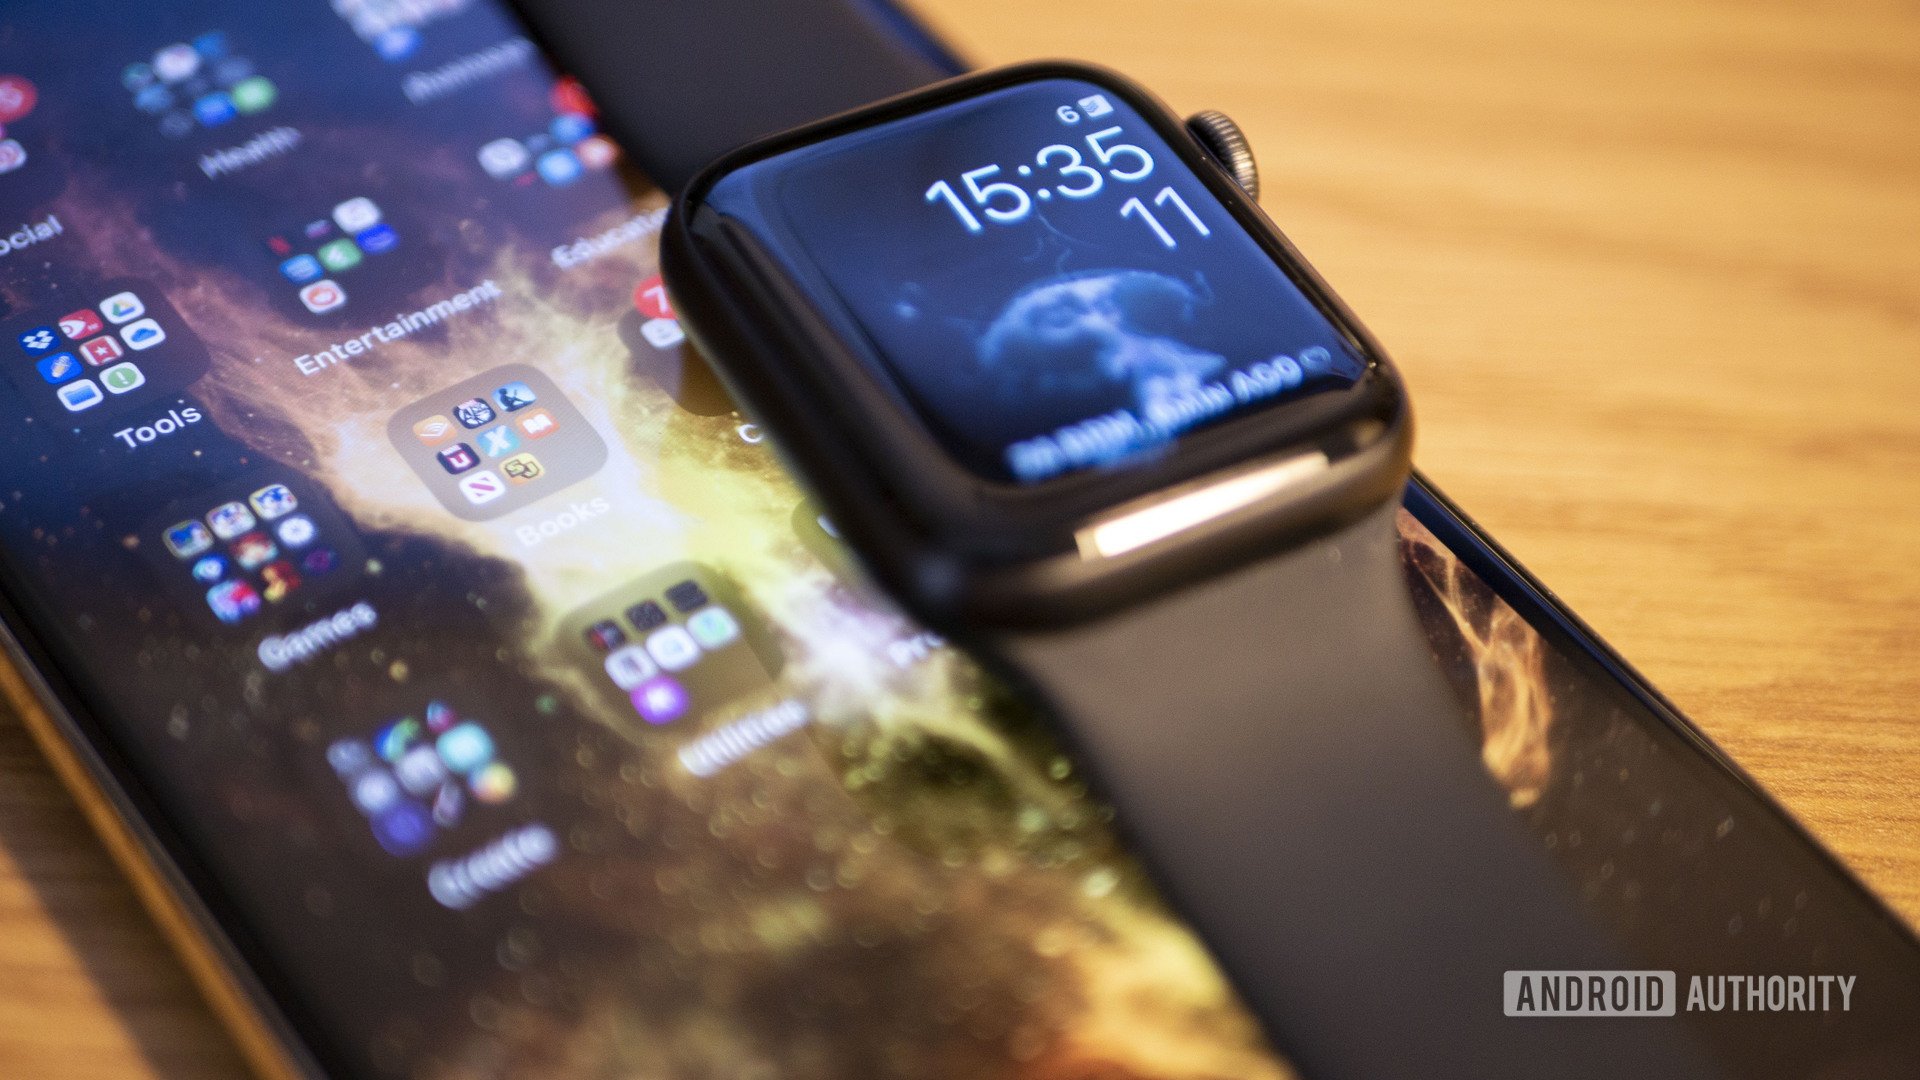 Can you use an Apple Watch with an Android phone?